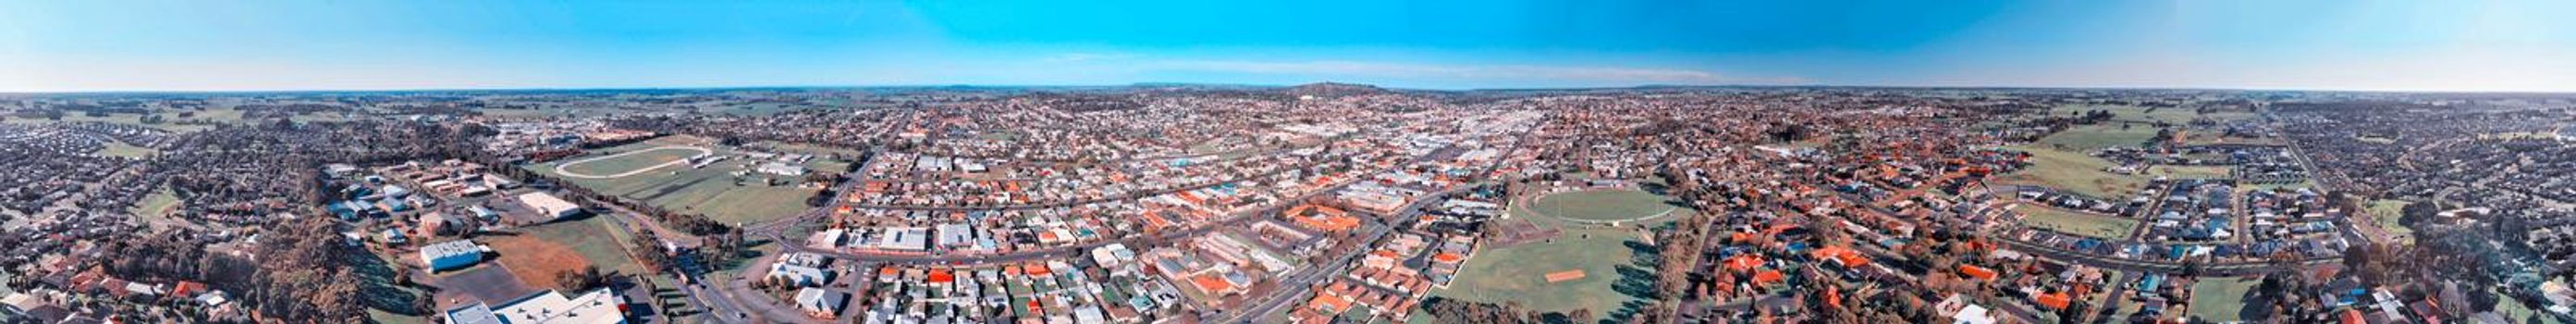 Panoramic aerial view of Mt Gambier skyline on a beautiful day, Australia.